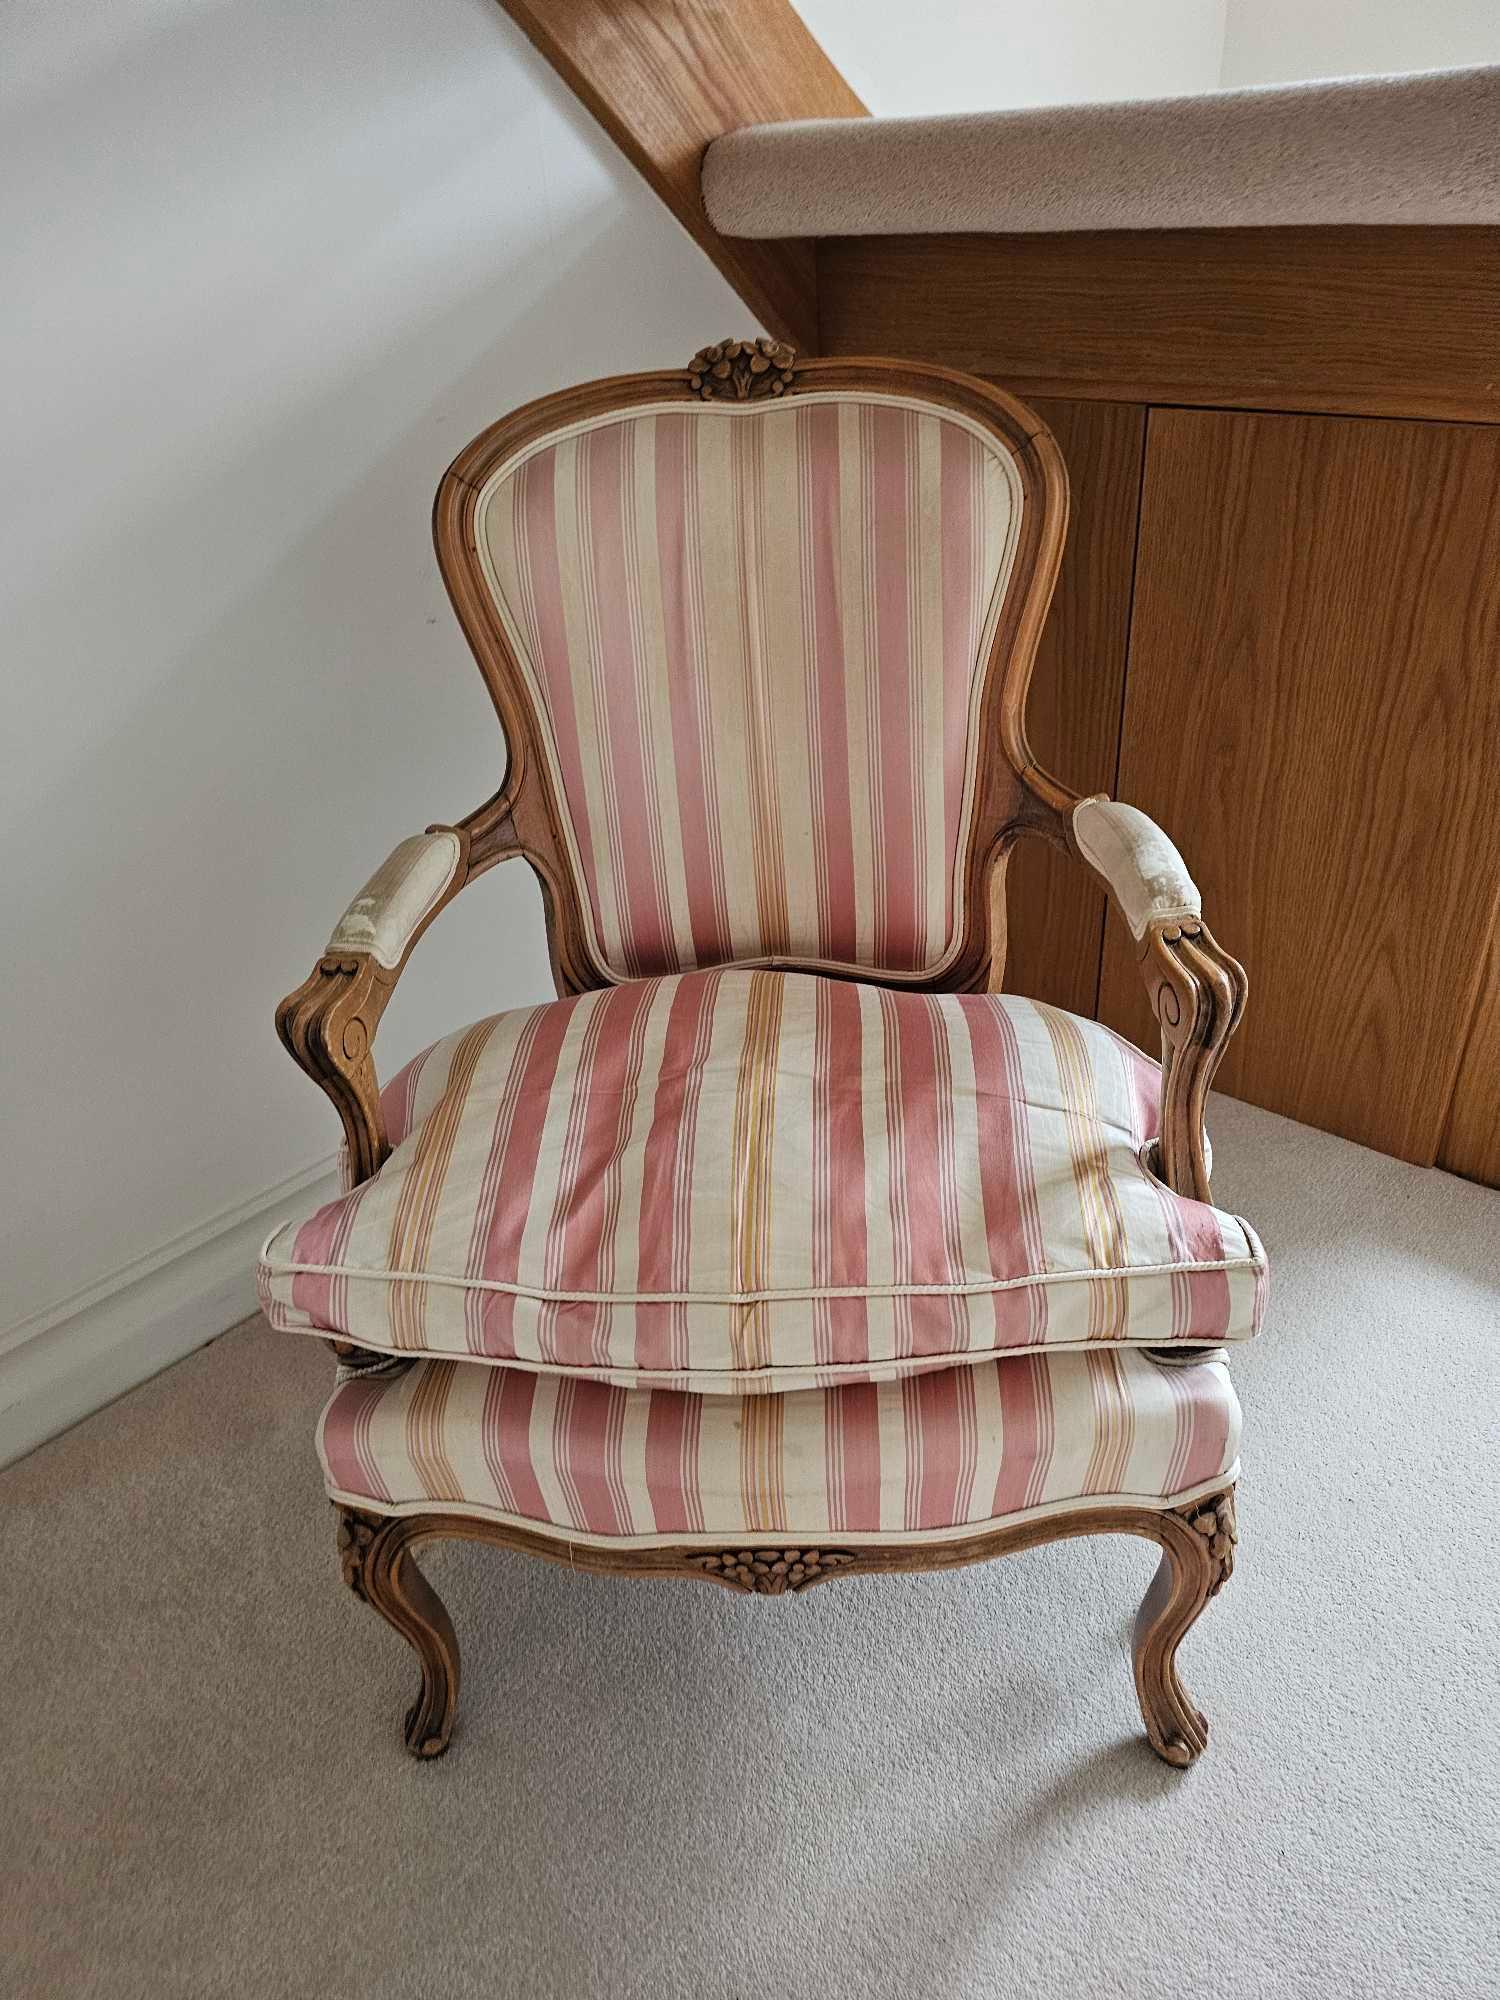 A Louis XV Style Beechwood Fauteuil The Shaped Rectangular Back With Floral Cresting, Striped